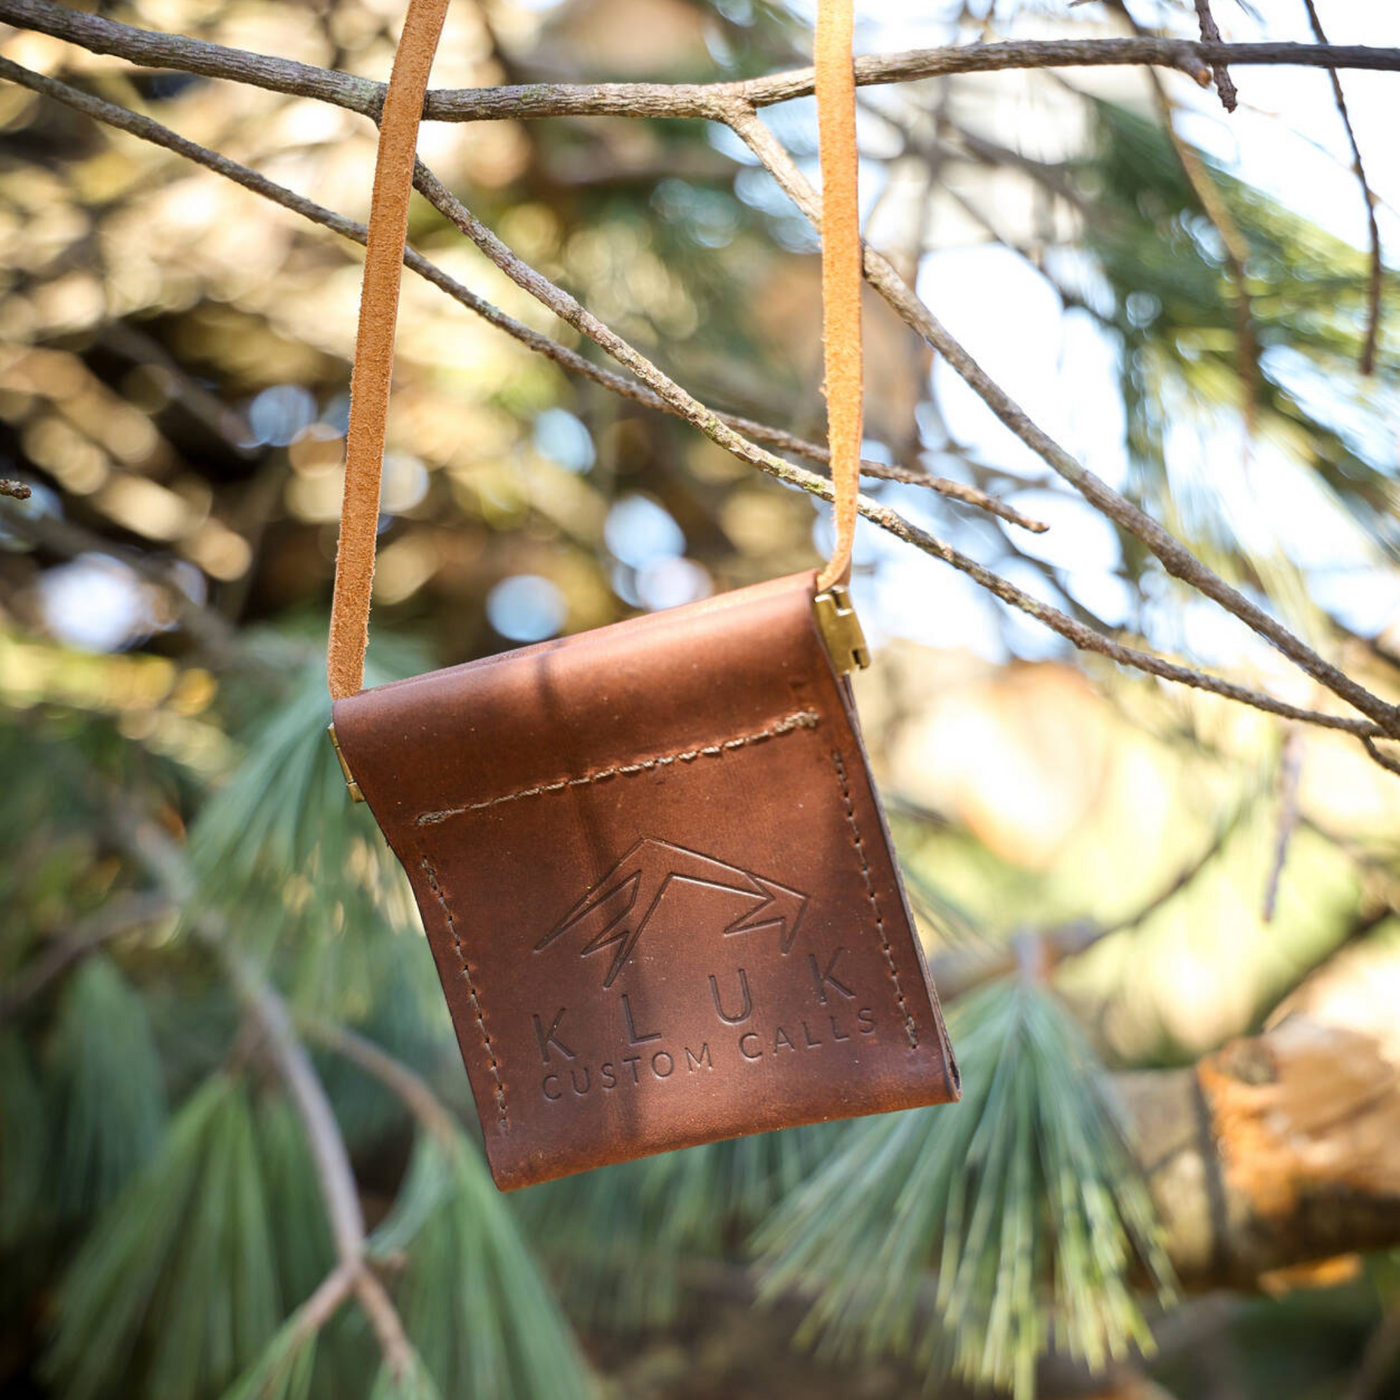 OIL TAN LEATHER CALL CASE